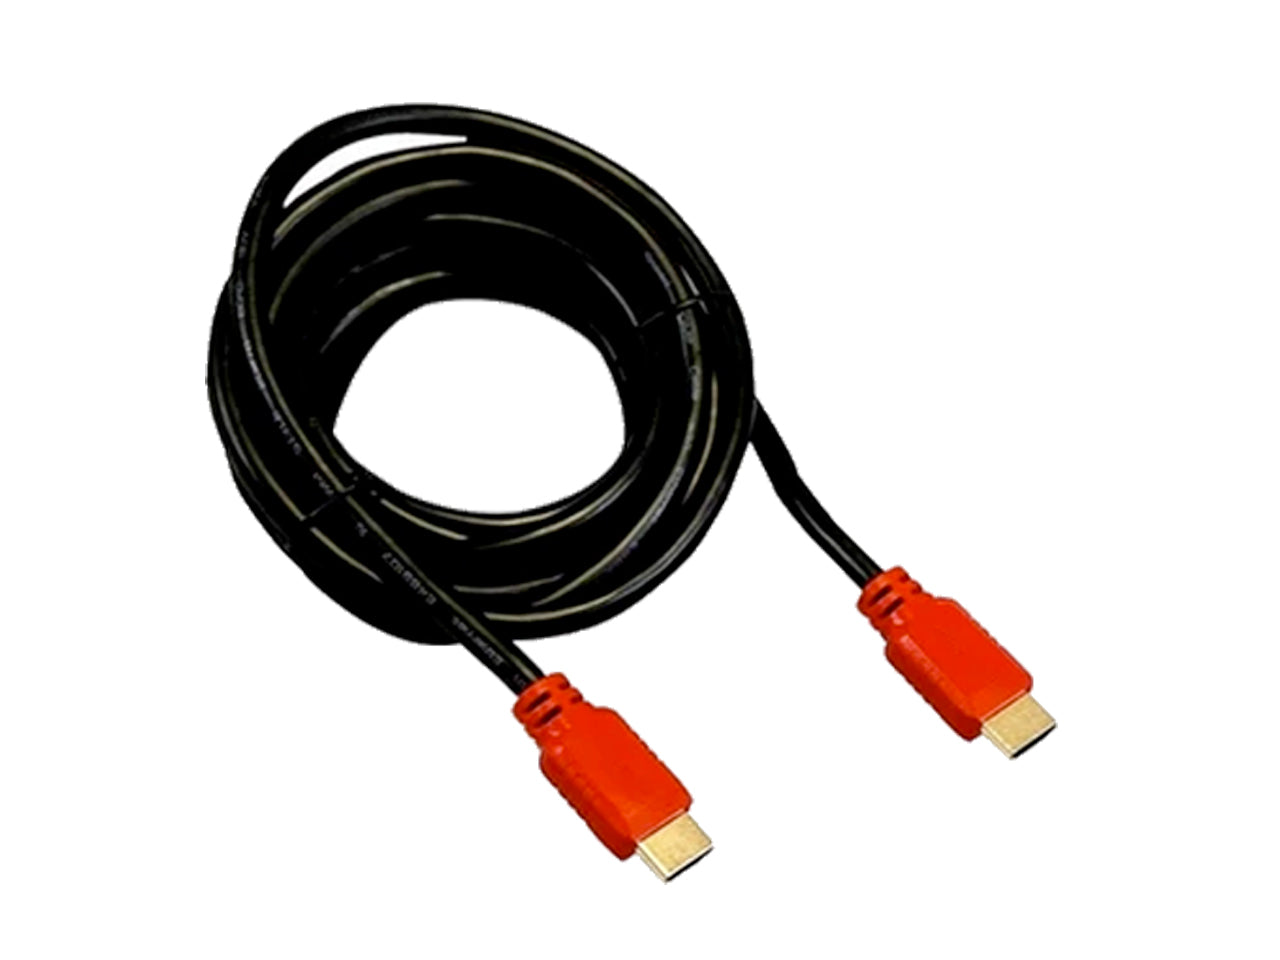 Honeywell HDMI Cable with Ethernet 3M Black